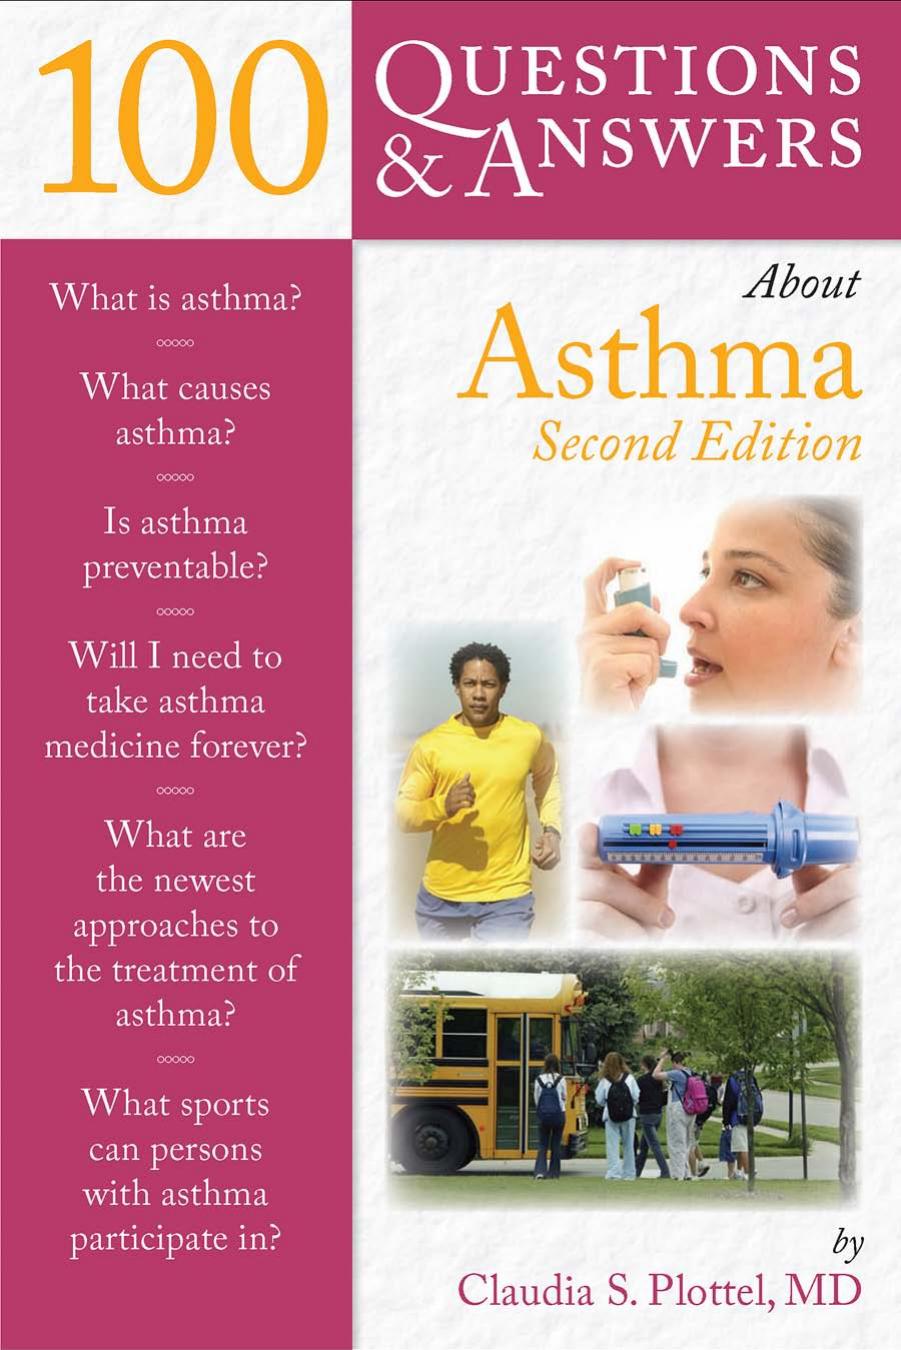 100 Questions and Answers About Asthma, Second Edition.jpg